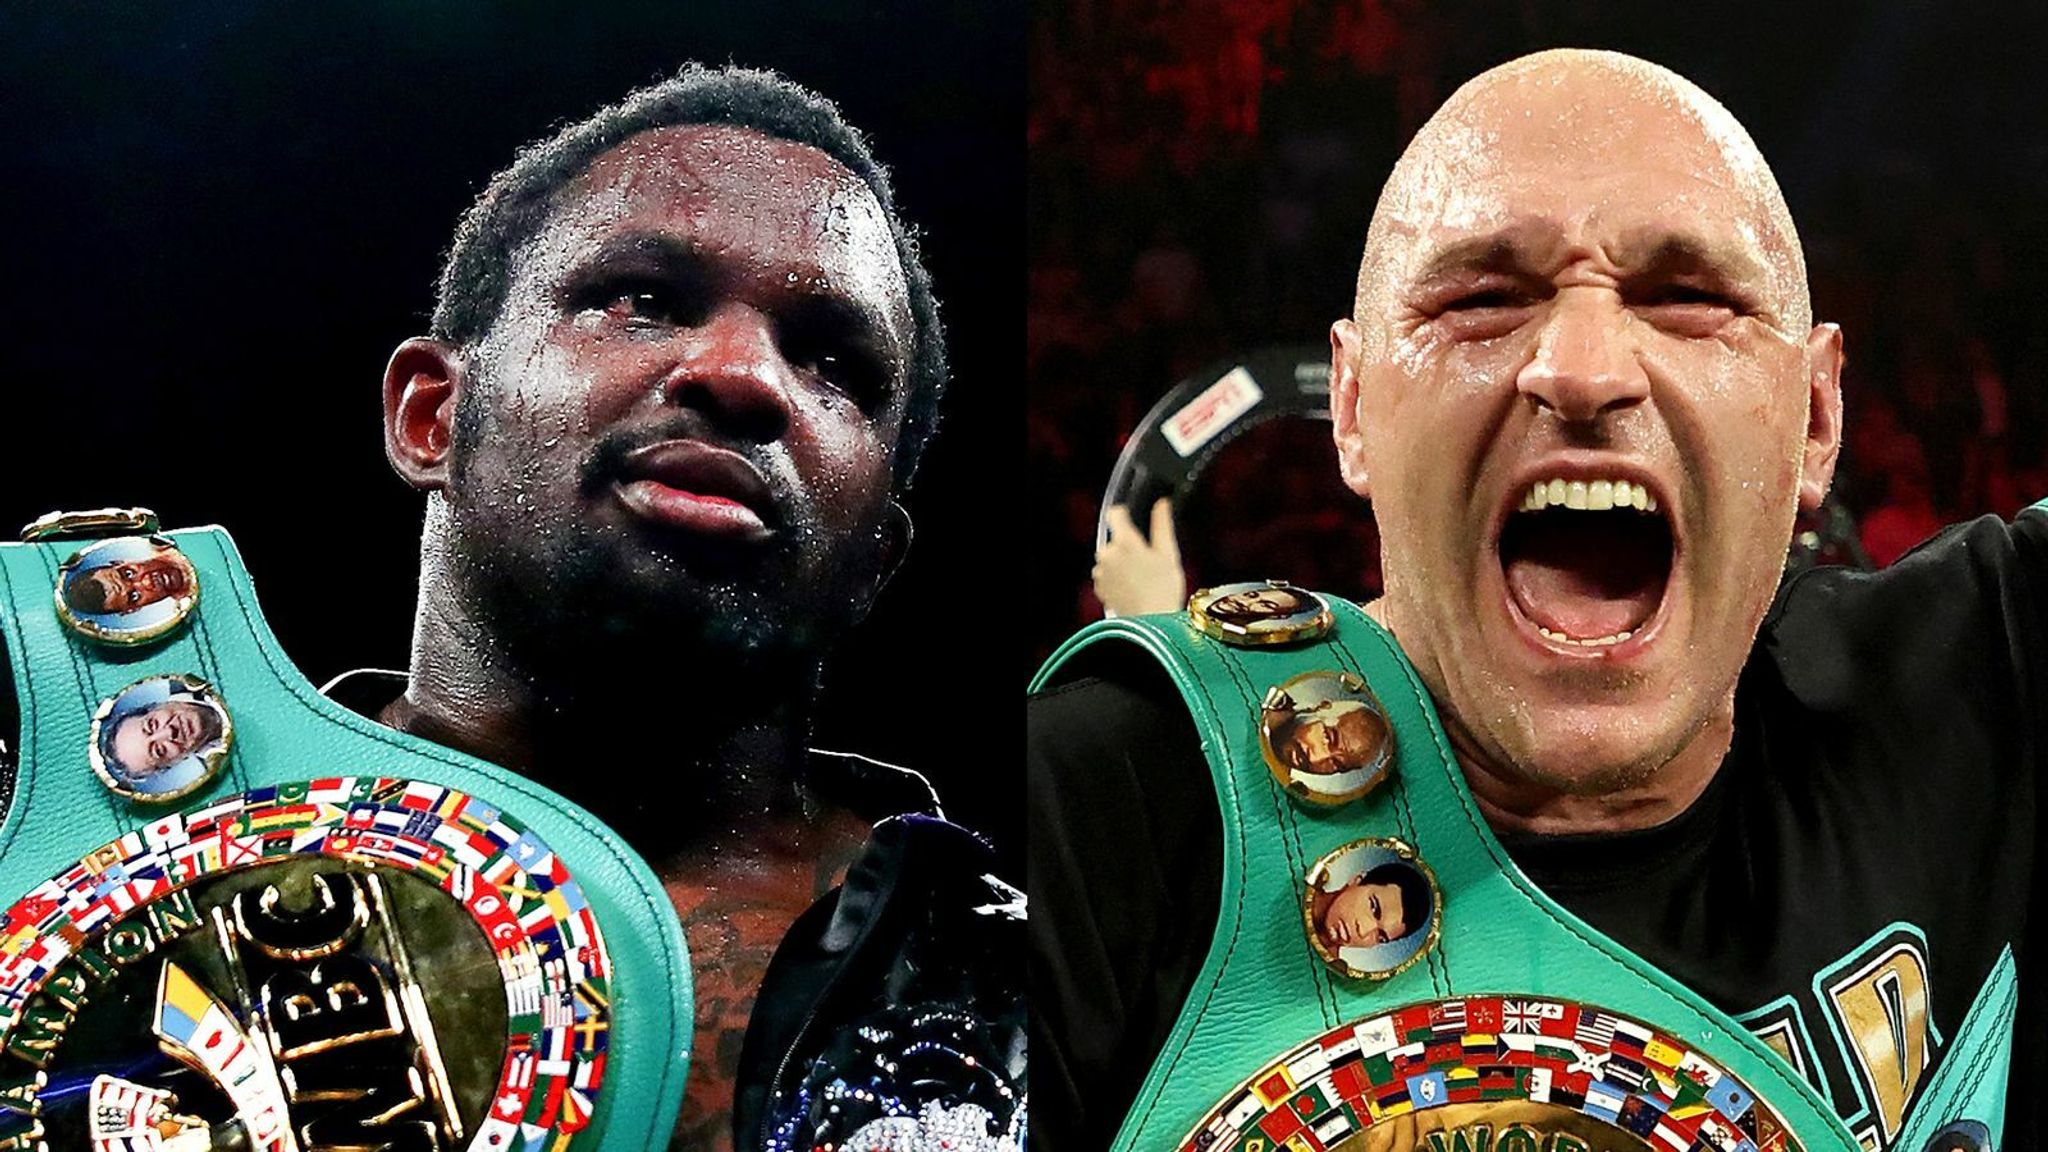 Tyson Fury to fight Dillian Whyte in WBC heavyweight championship fight Boxing News Sky Sports